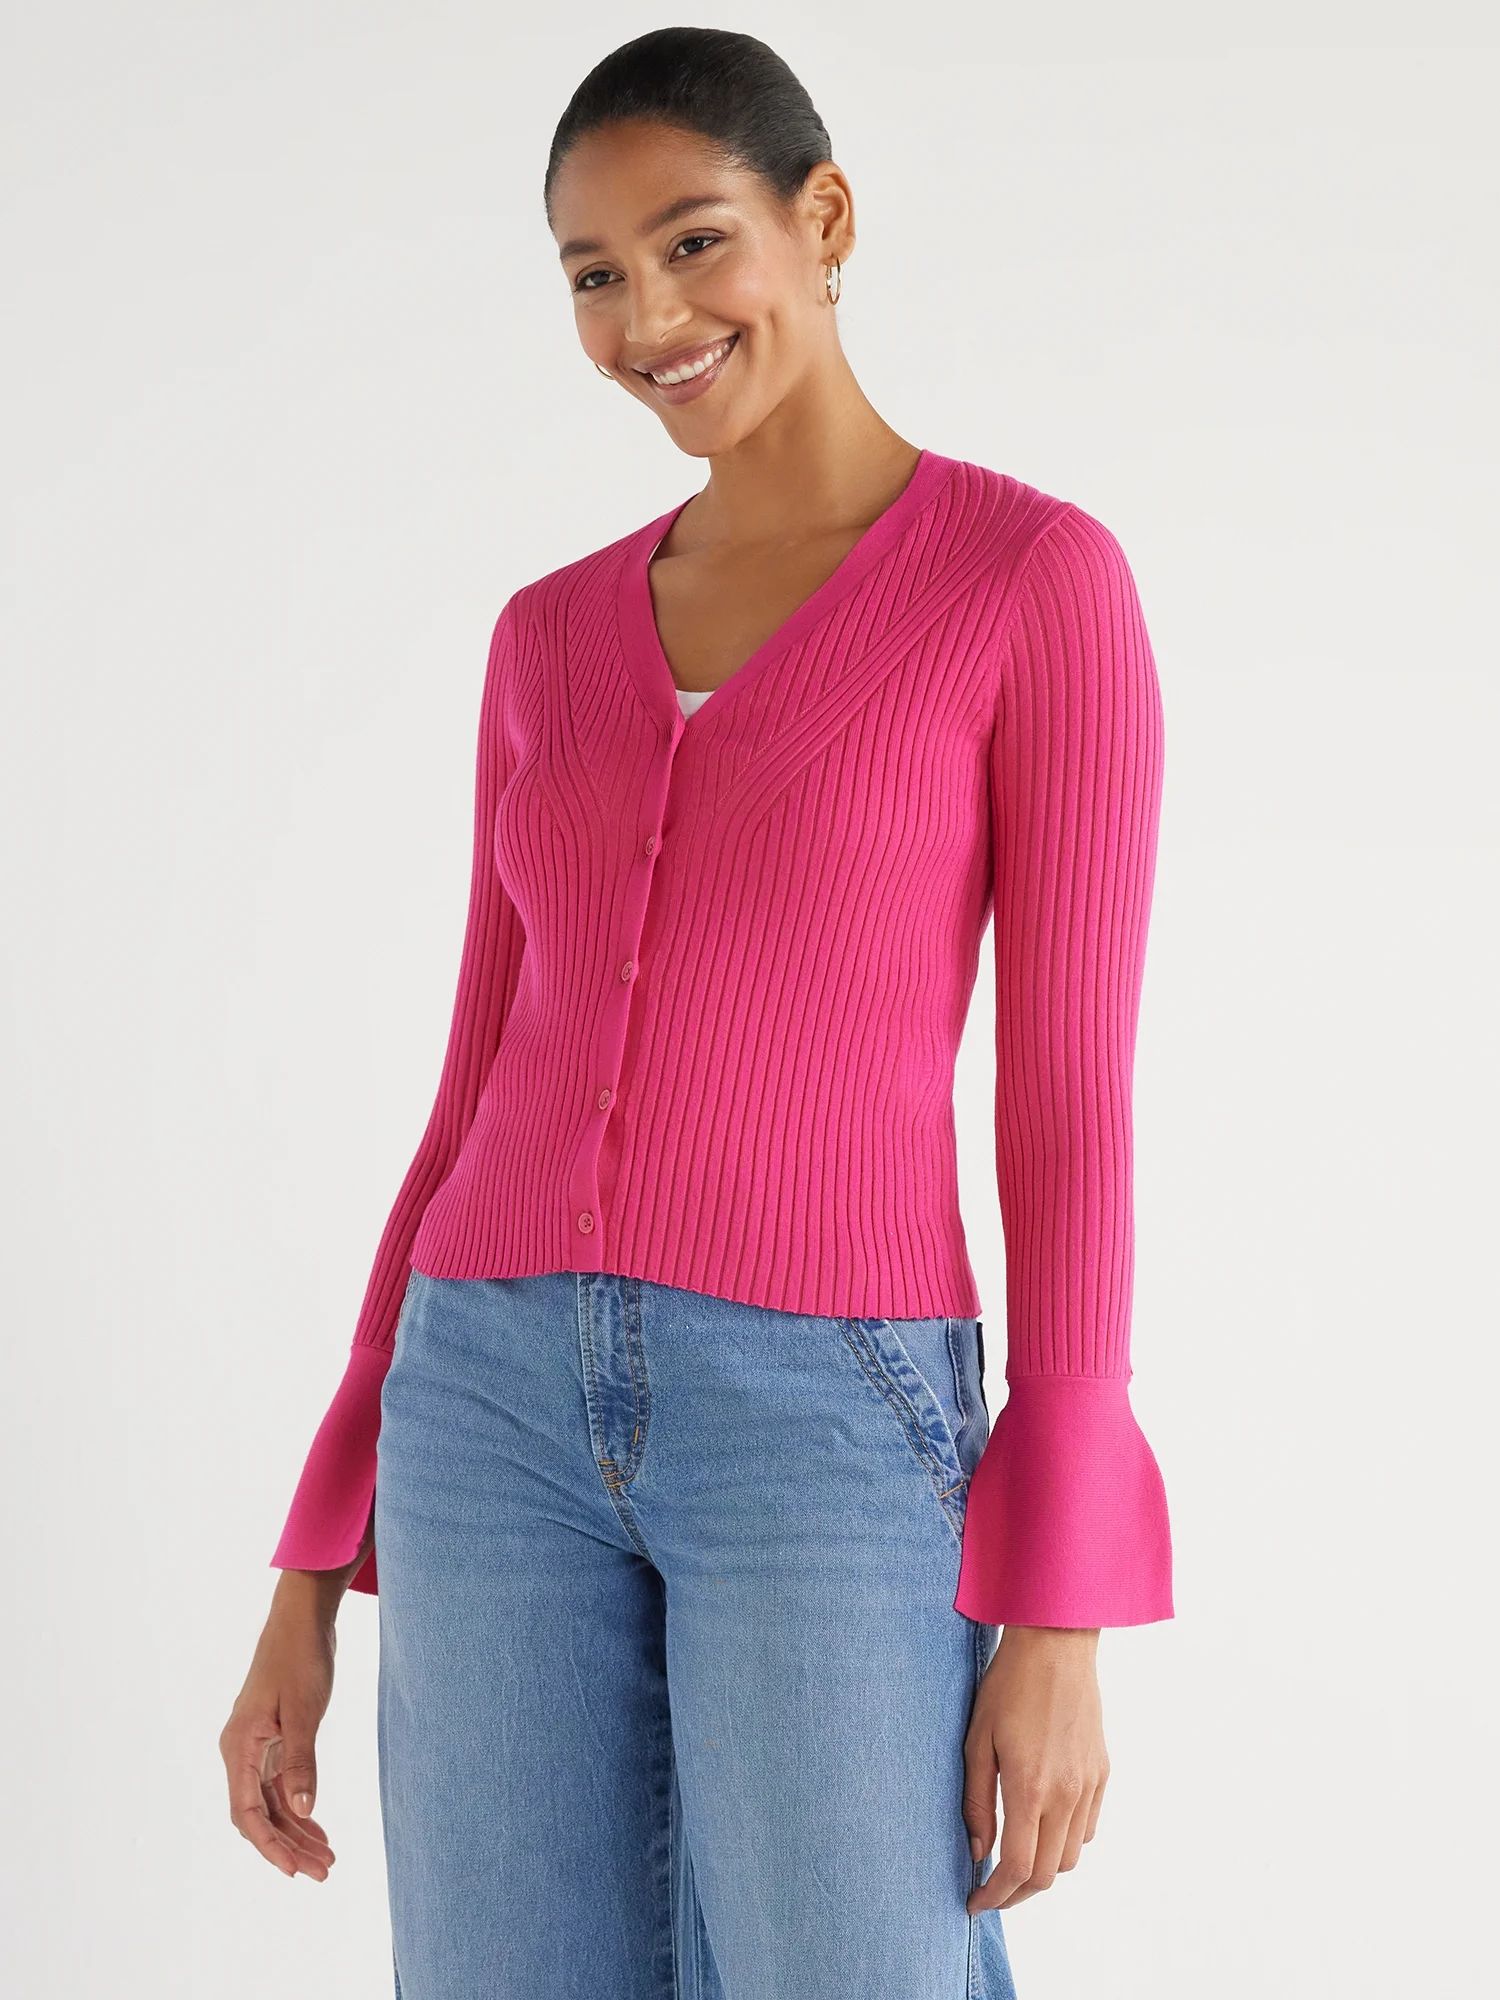 Scoop Women’s Ribbed Button Front Cardigan Sweater, Sizes XS-XXL | Walmart (US)